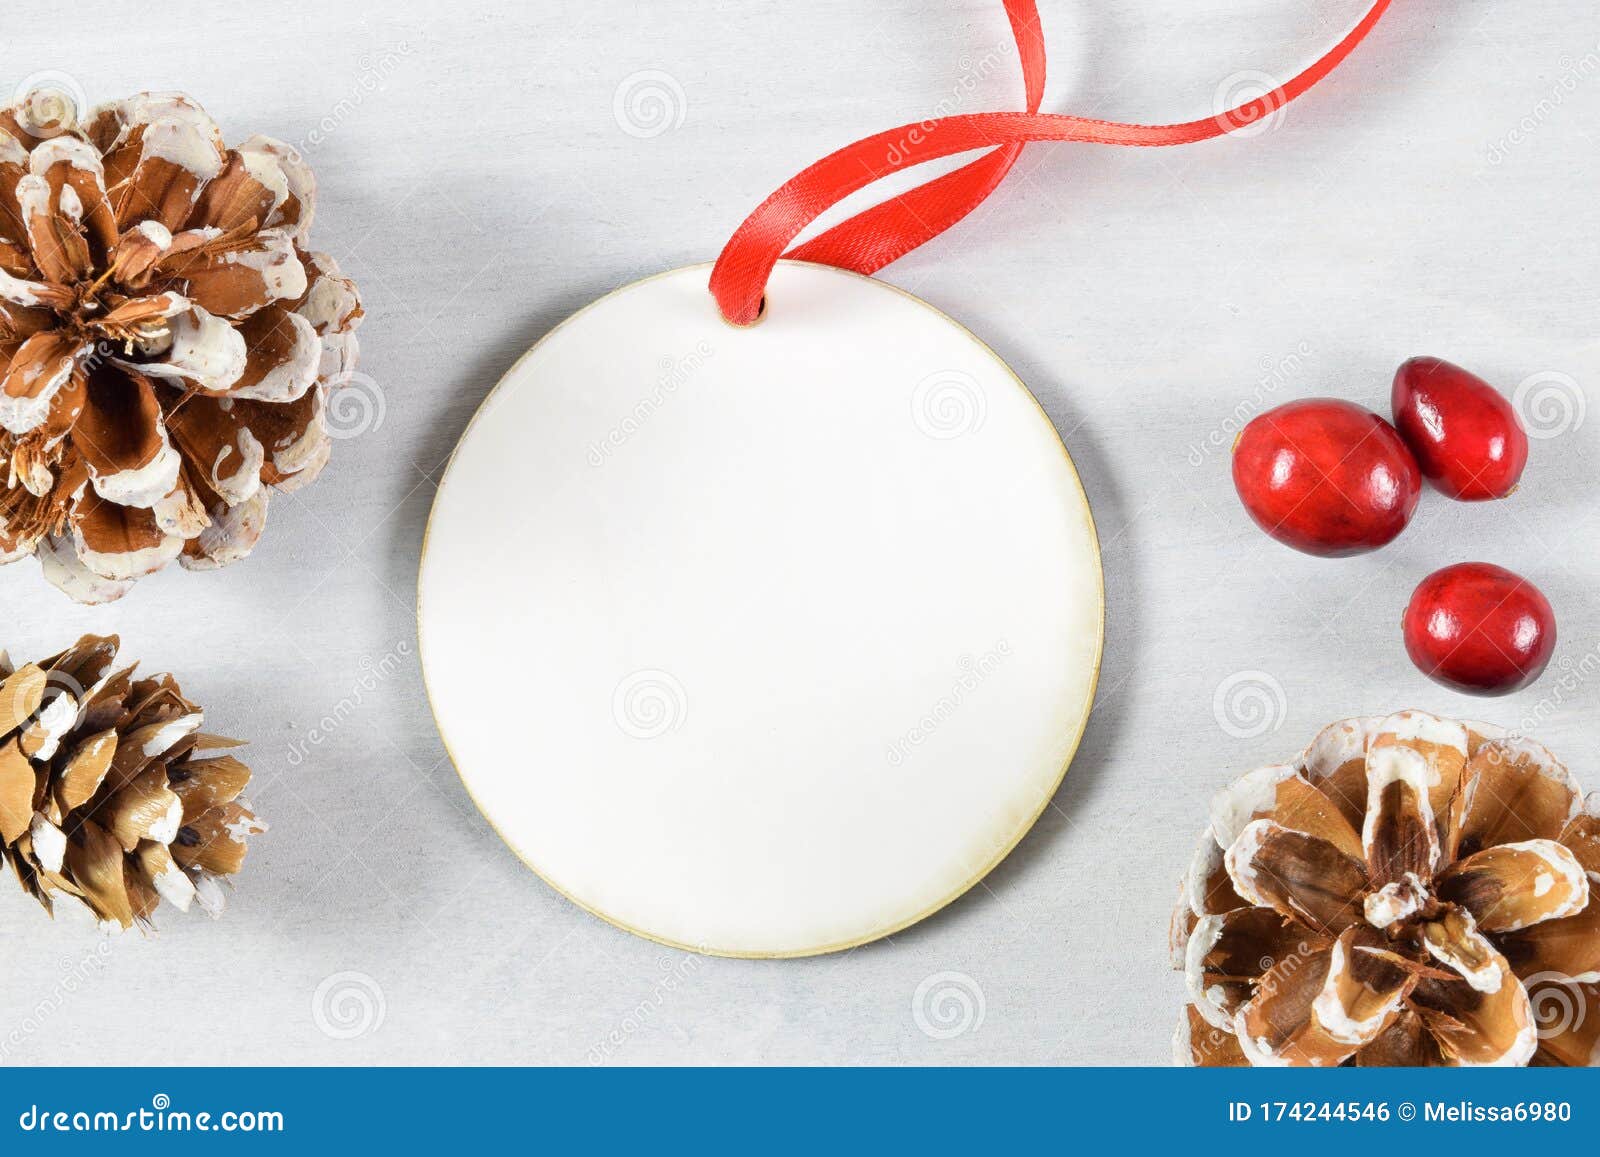 Add your own image and background Clear round Christmas ornament mockup template